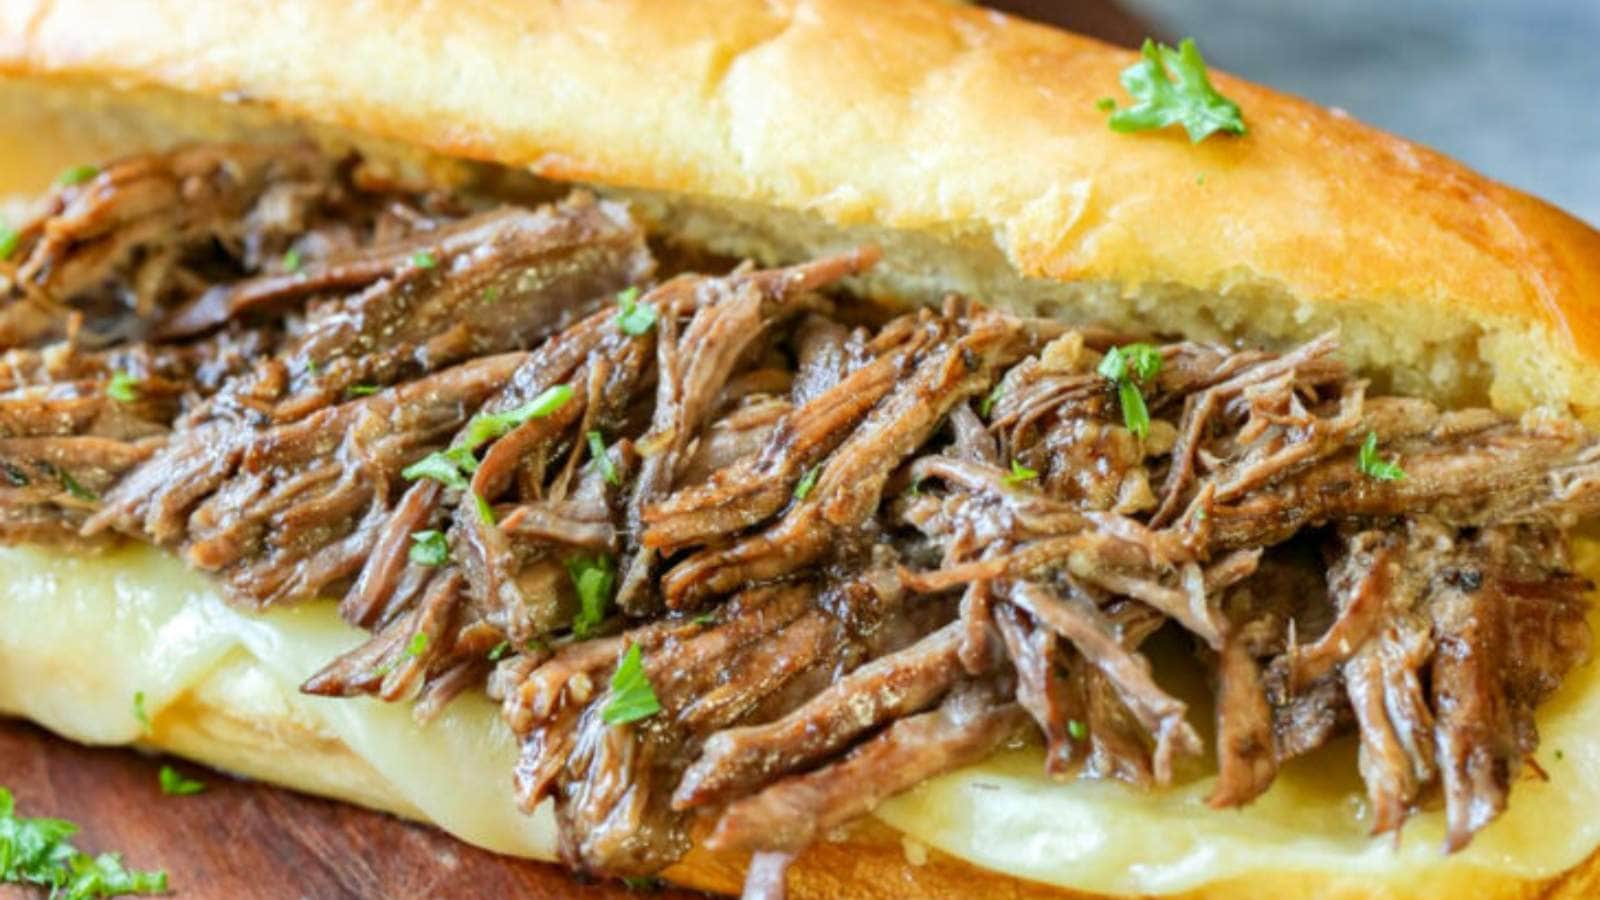 Slow Cooker Pulled Beef for Sandwiches or Tacos recipe by Blackberry Babe.